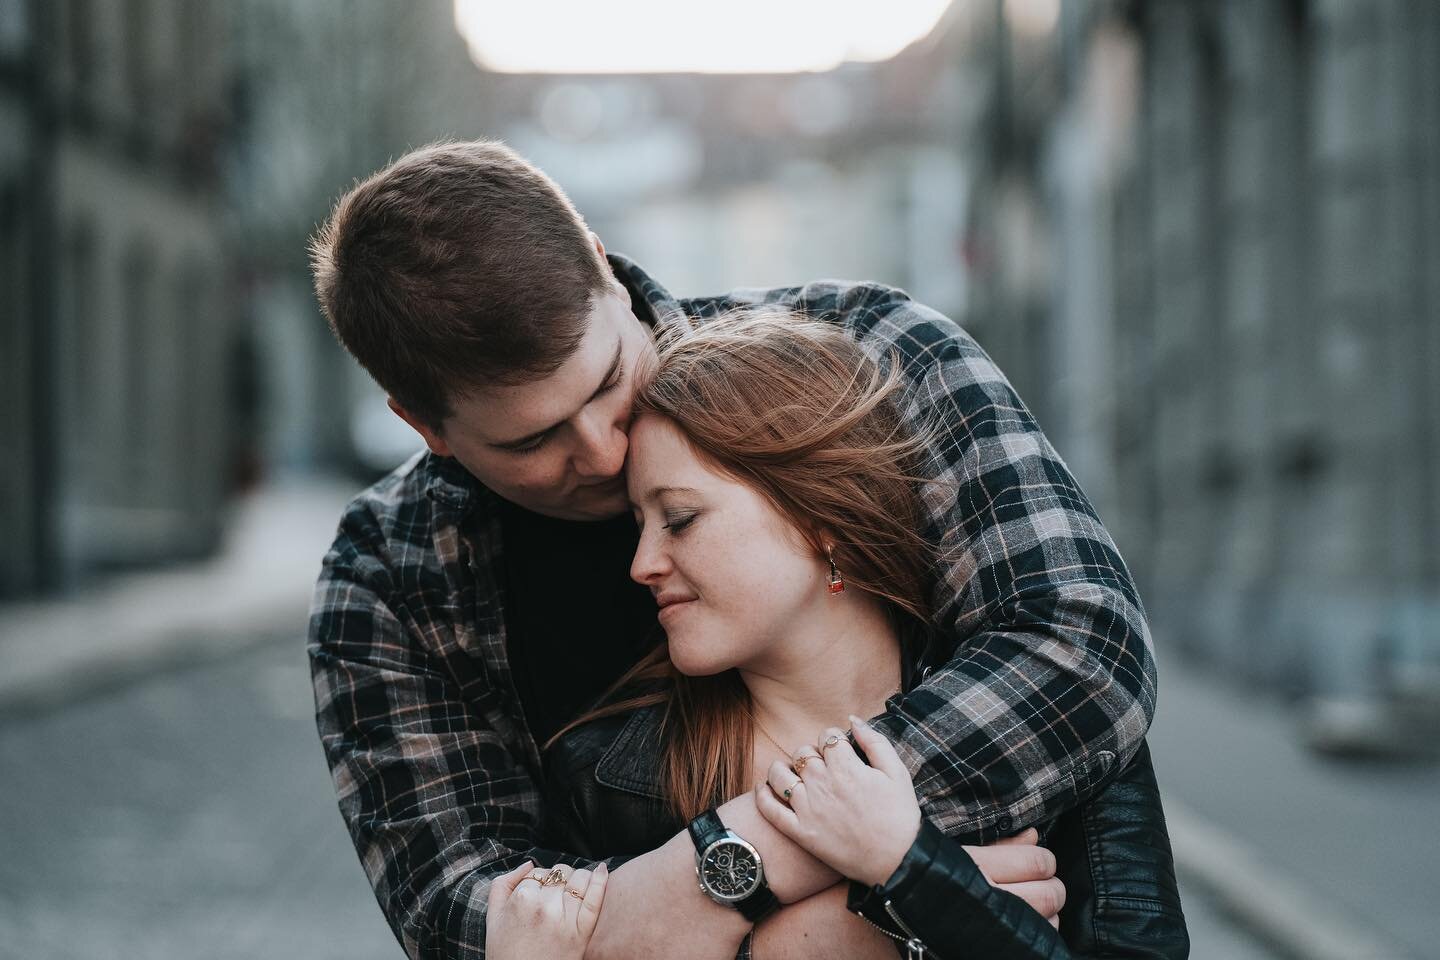 One of my favorite shots from the last couple photo shoot🥰

#bern #coupleshoot